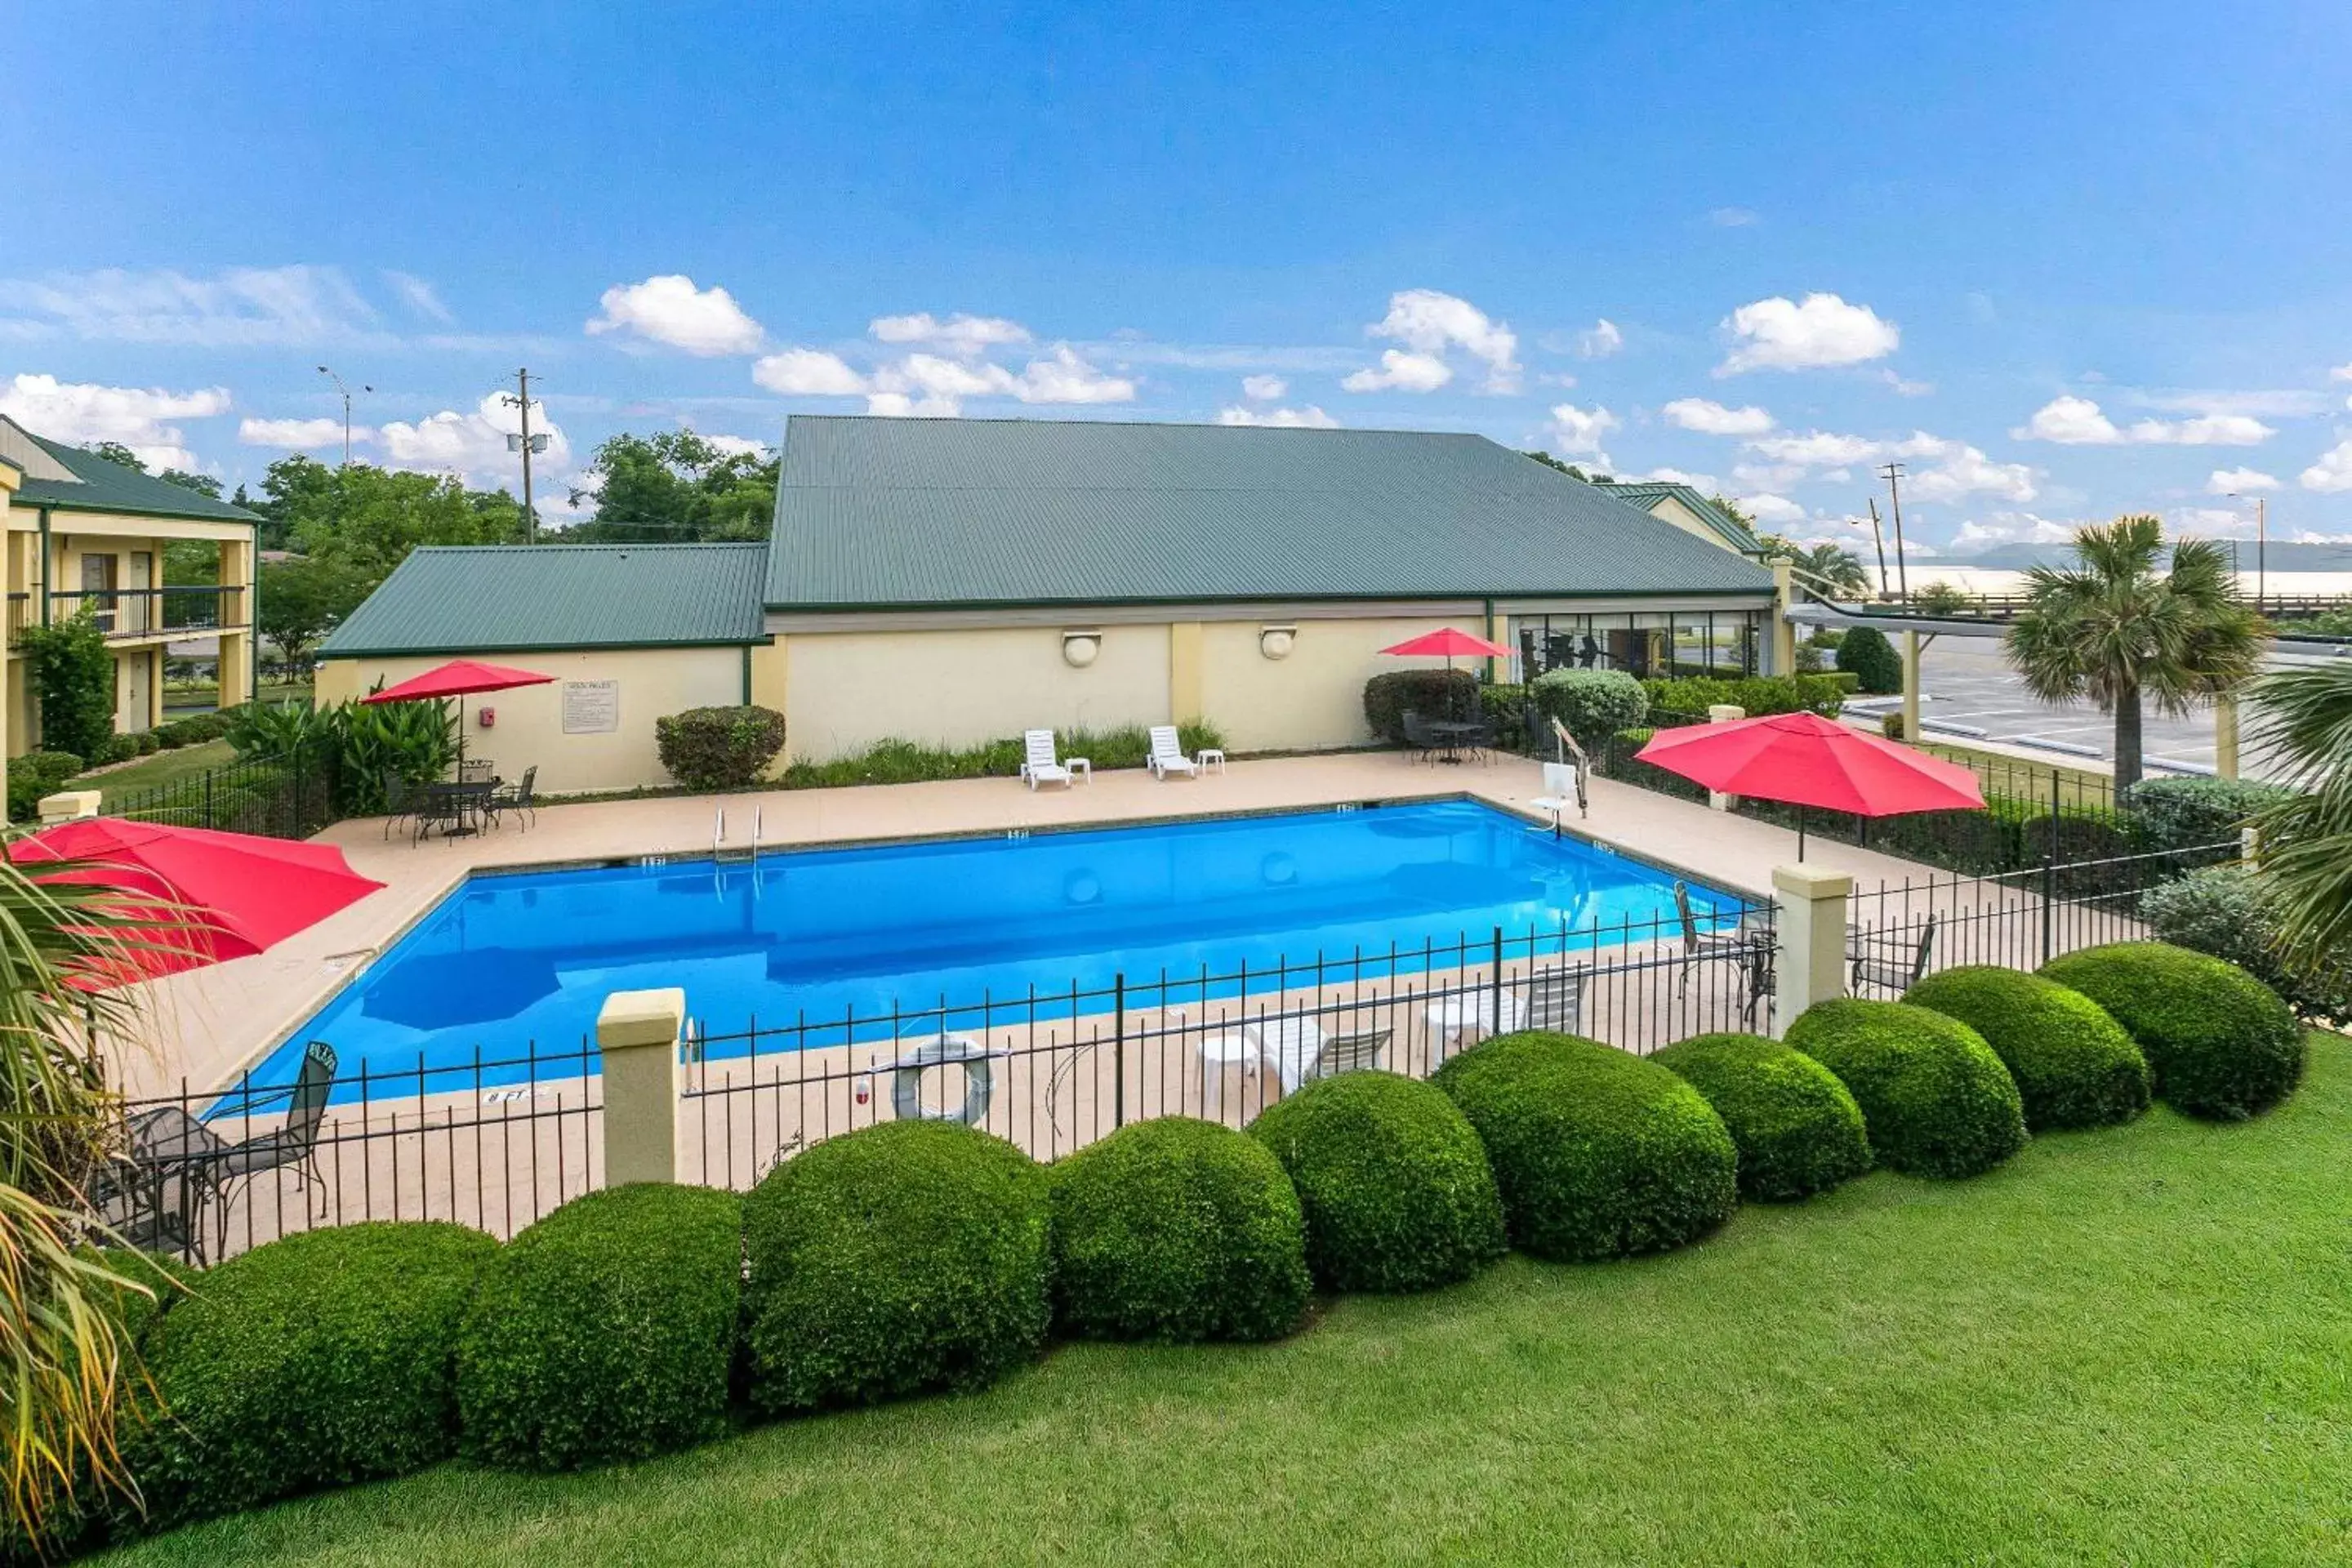 On site, Pool View in Quality Inn & Suites Eufaula